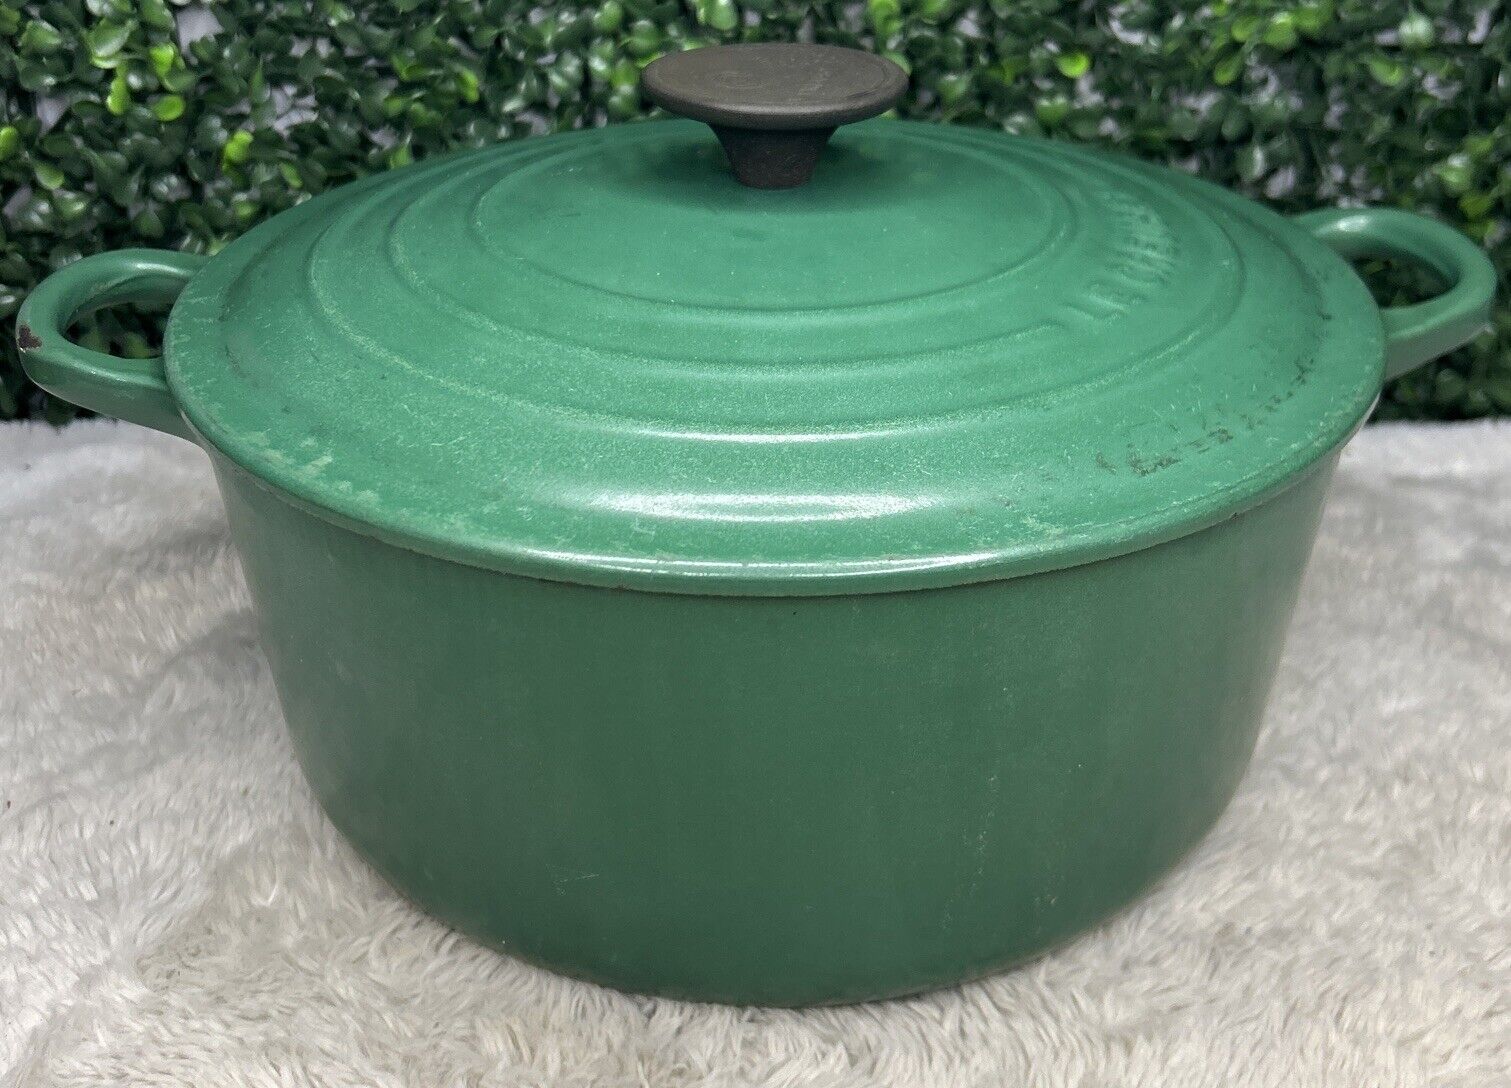 Le Creuset France #24 Dark Green Enameled Cast Iron Dutch Oven With Lid EUC